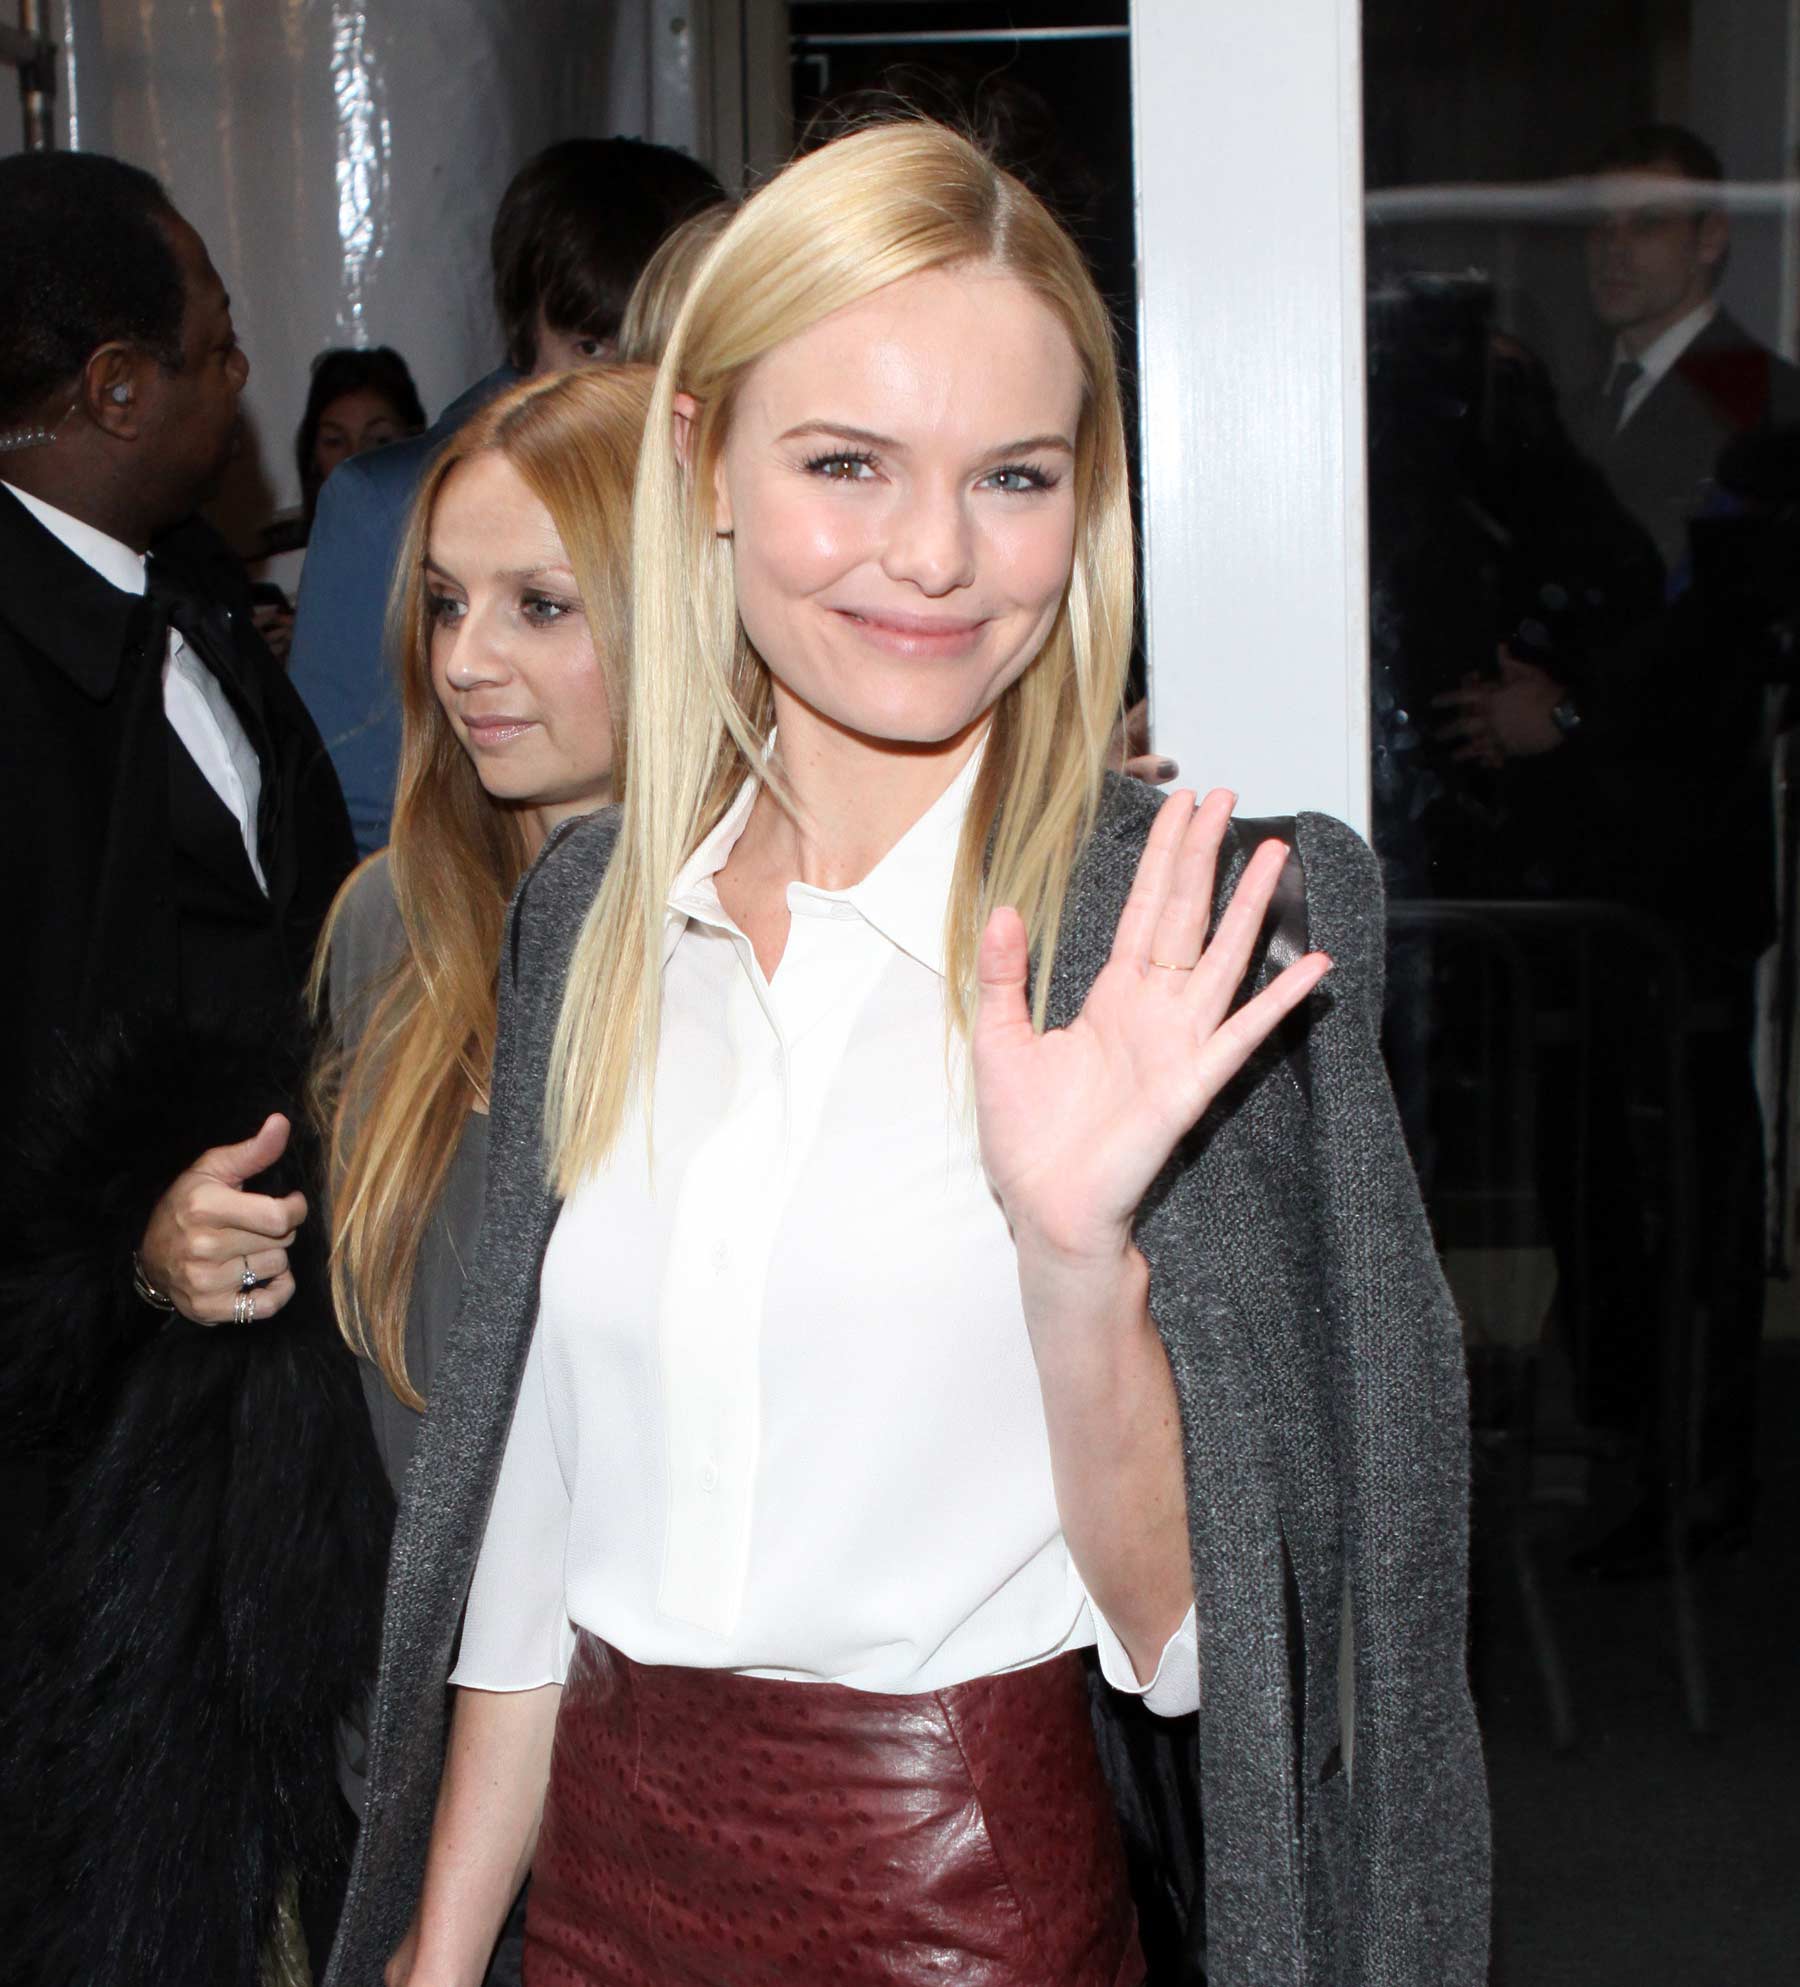 Kate Bosworth attends the Calvin Klein Fall Fashion Show